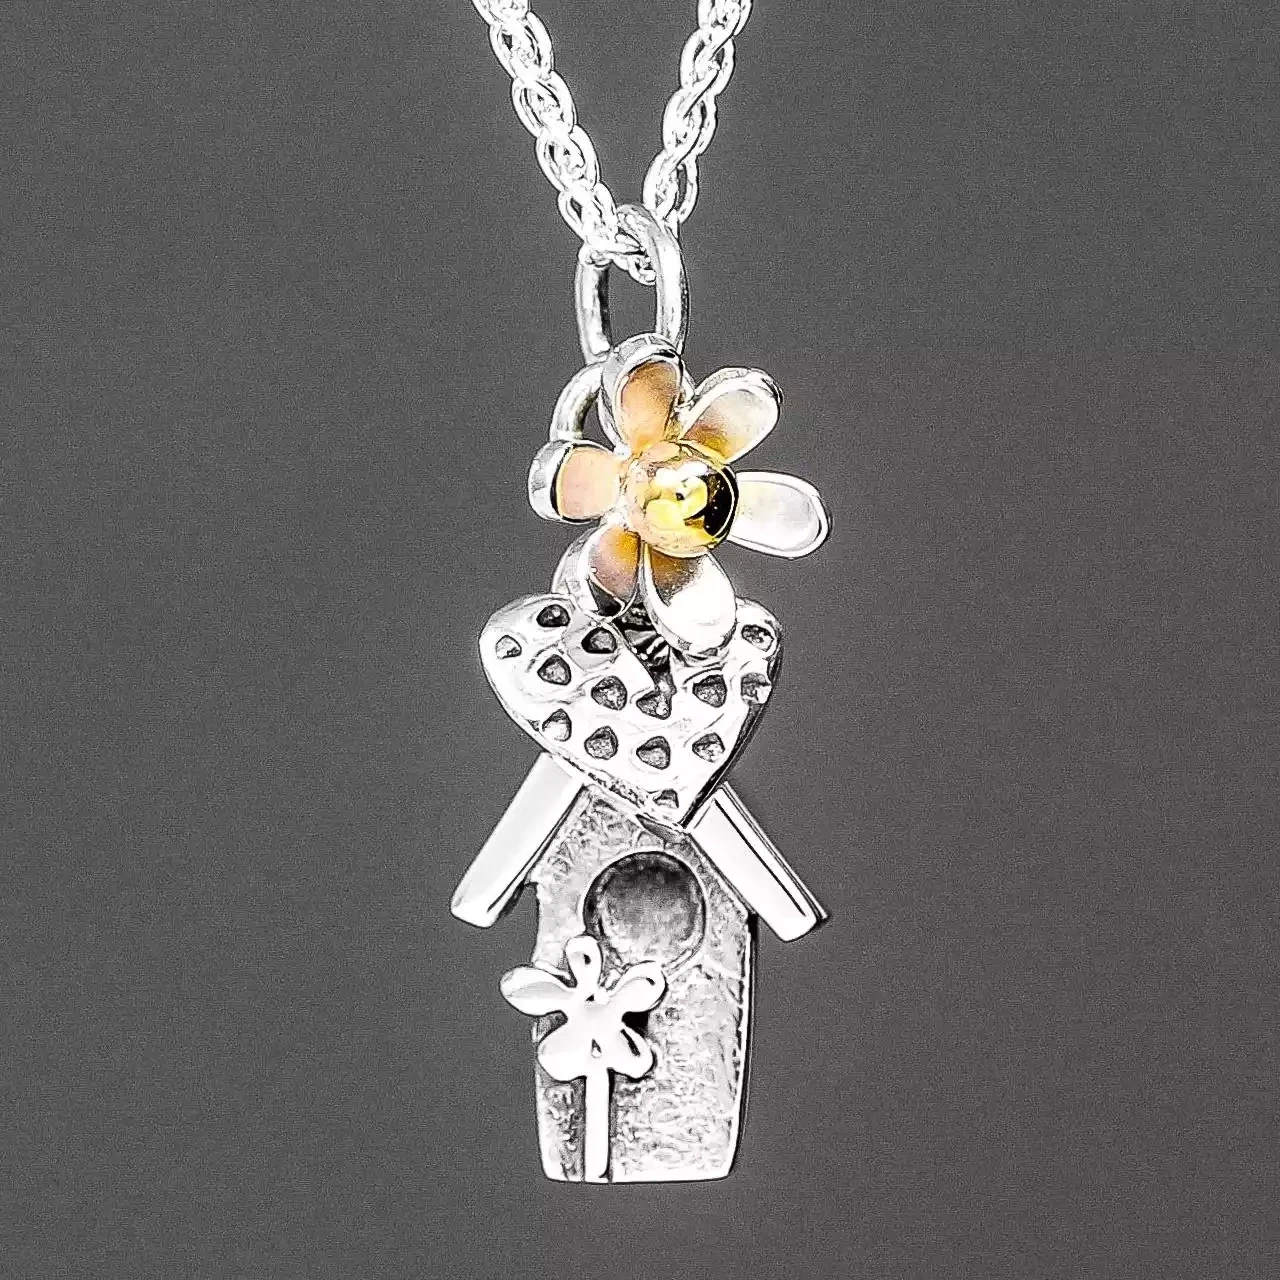 Home is Where the Heart is Silver and Gold Necklace by Linda Macdonald